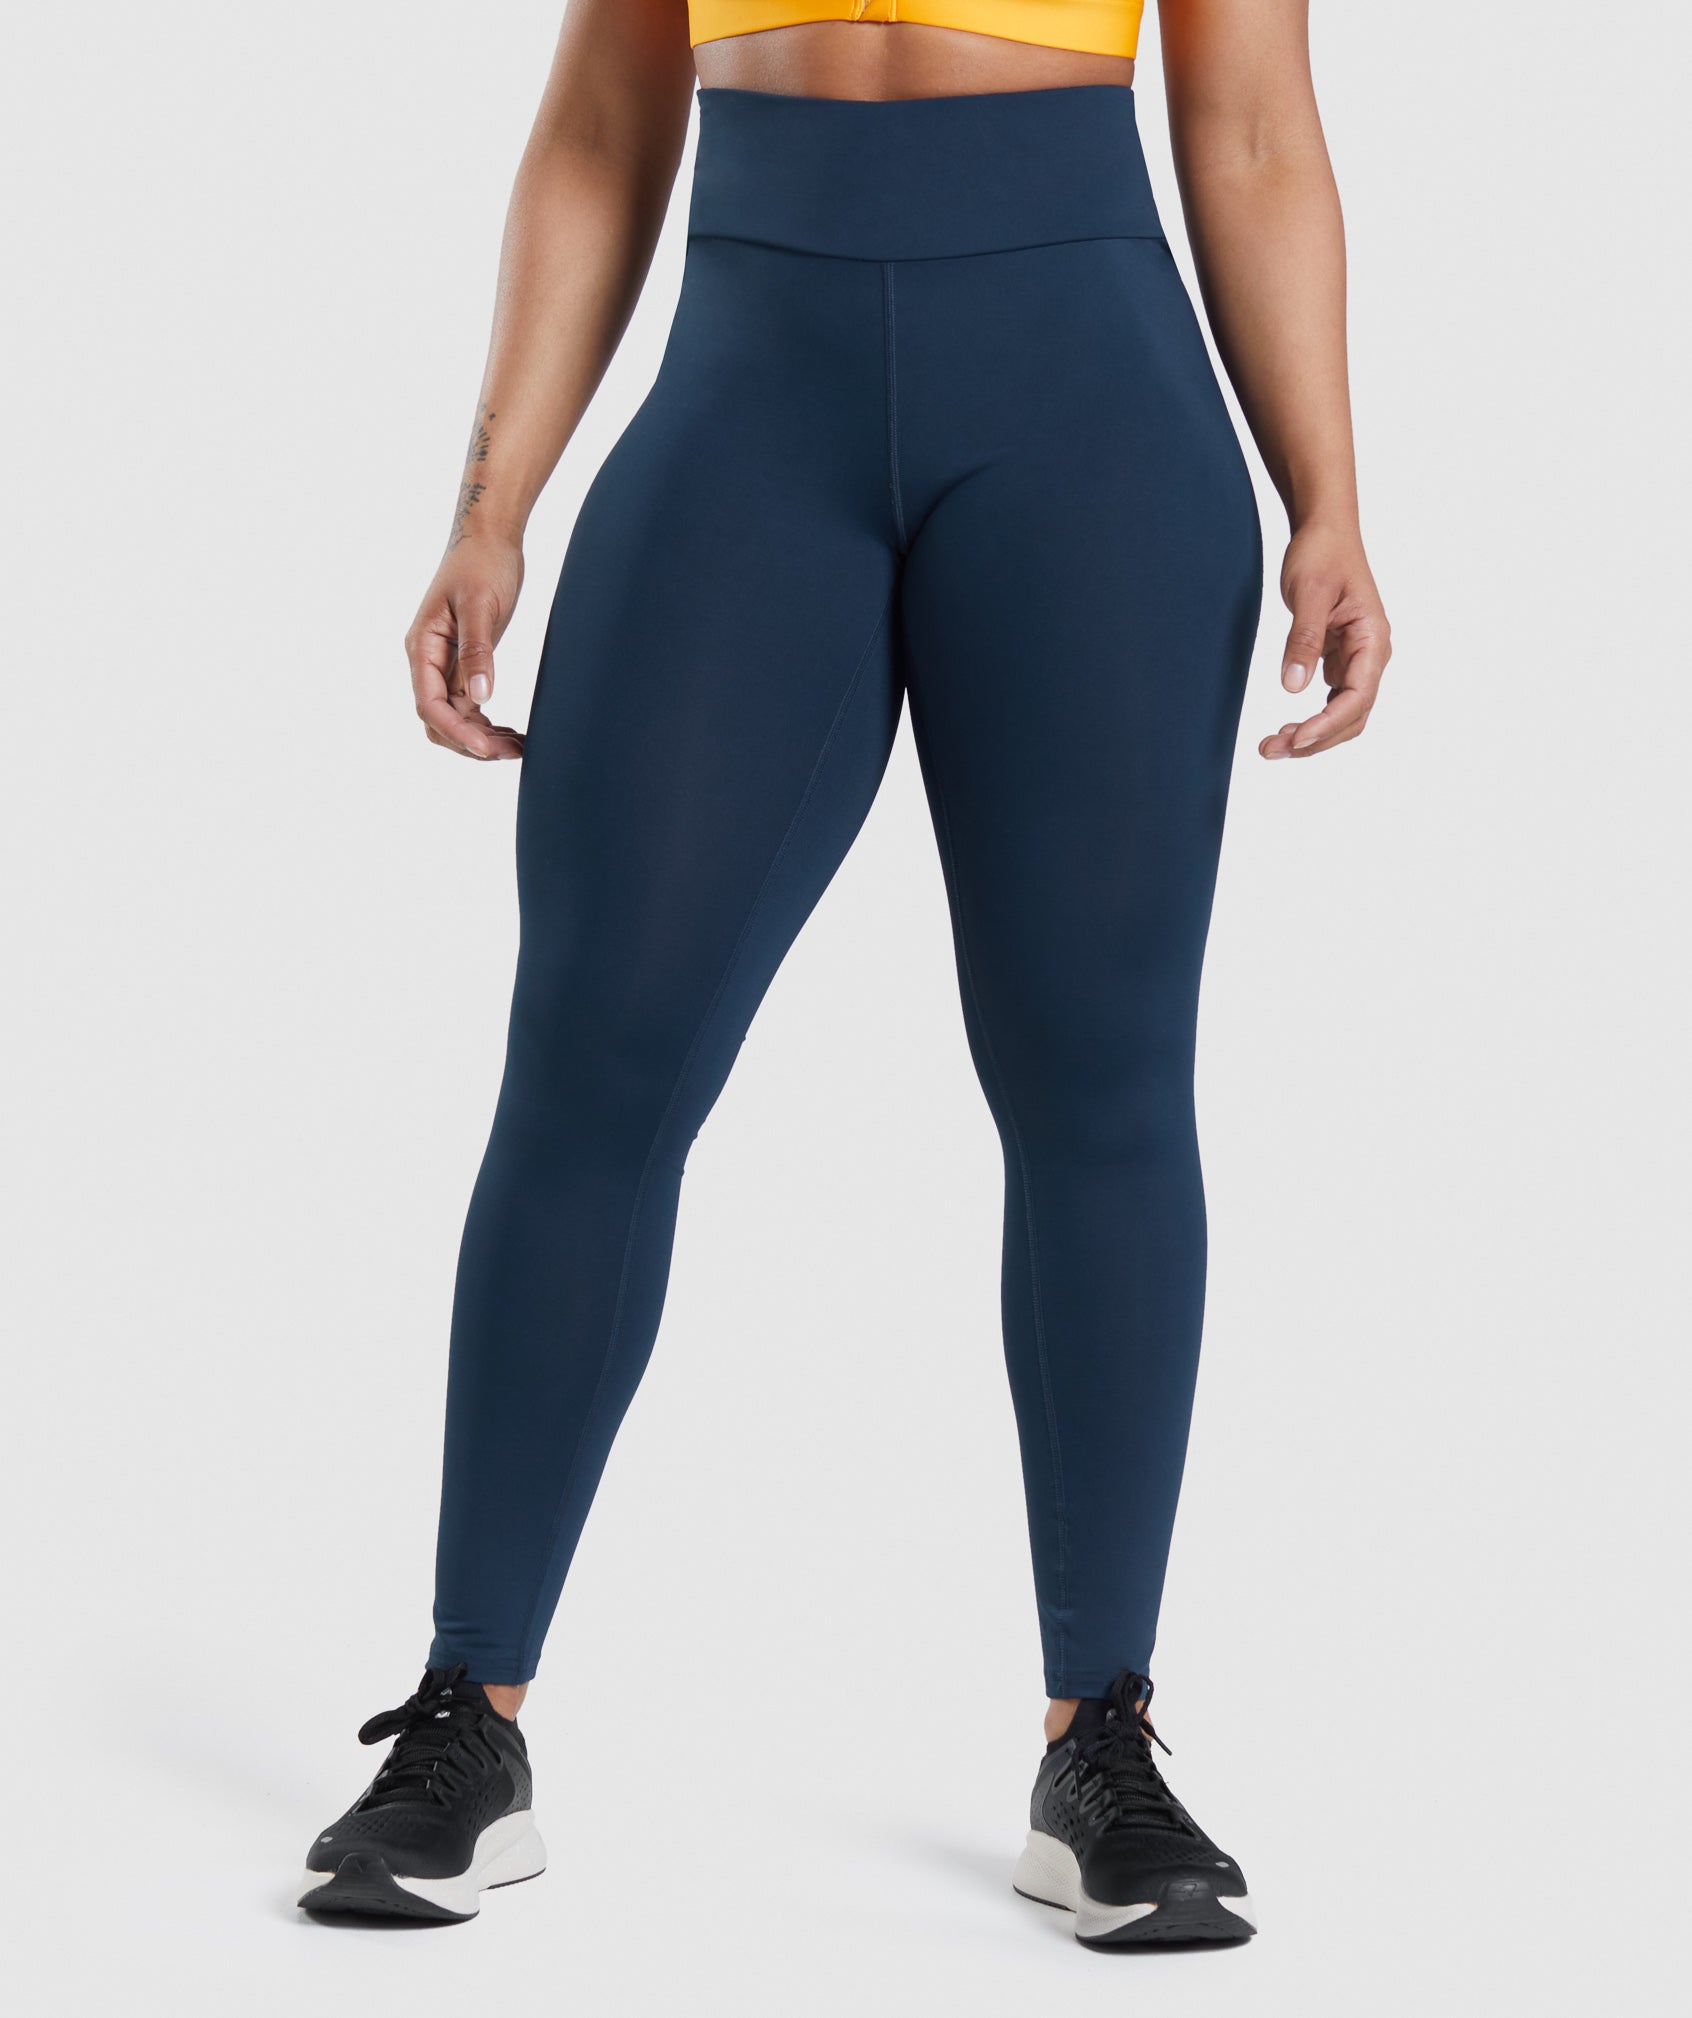 Gymshark Speed Leggings. Navy Size S NWT - $39 New With Tags - From BZ